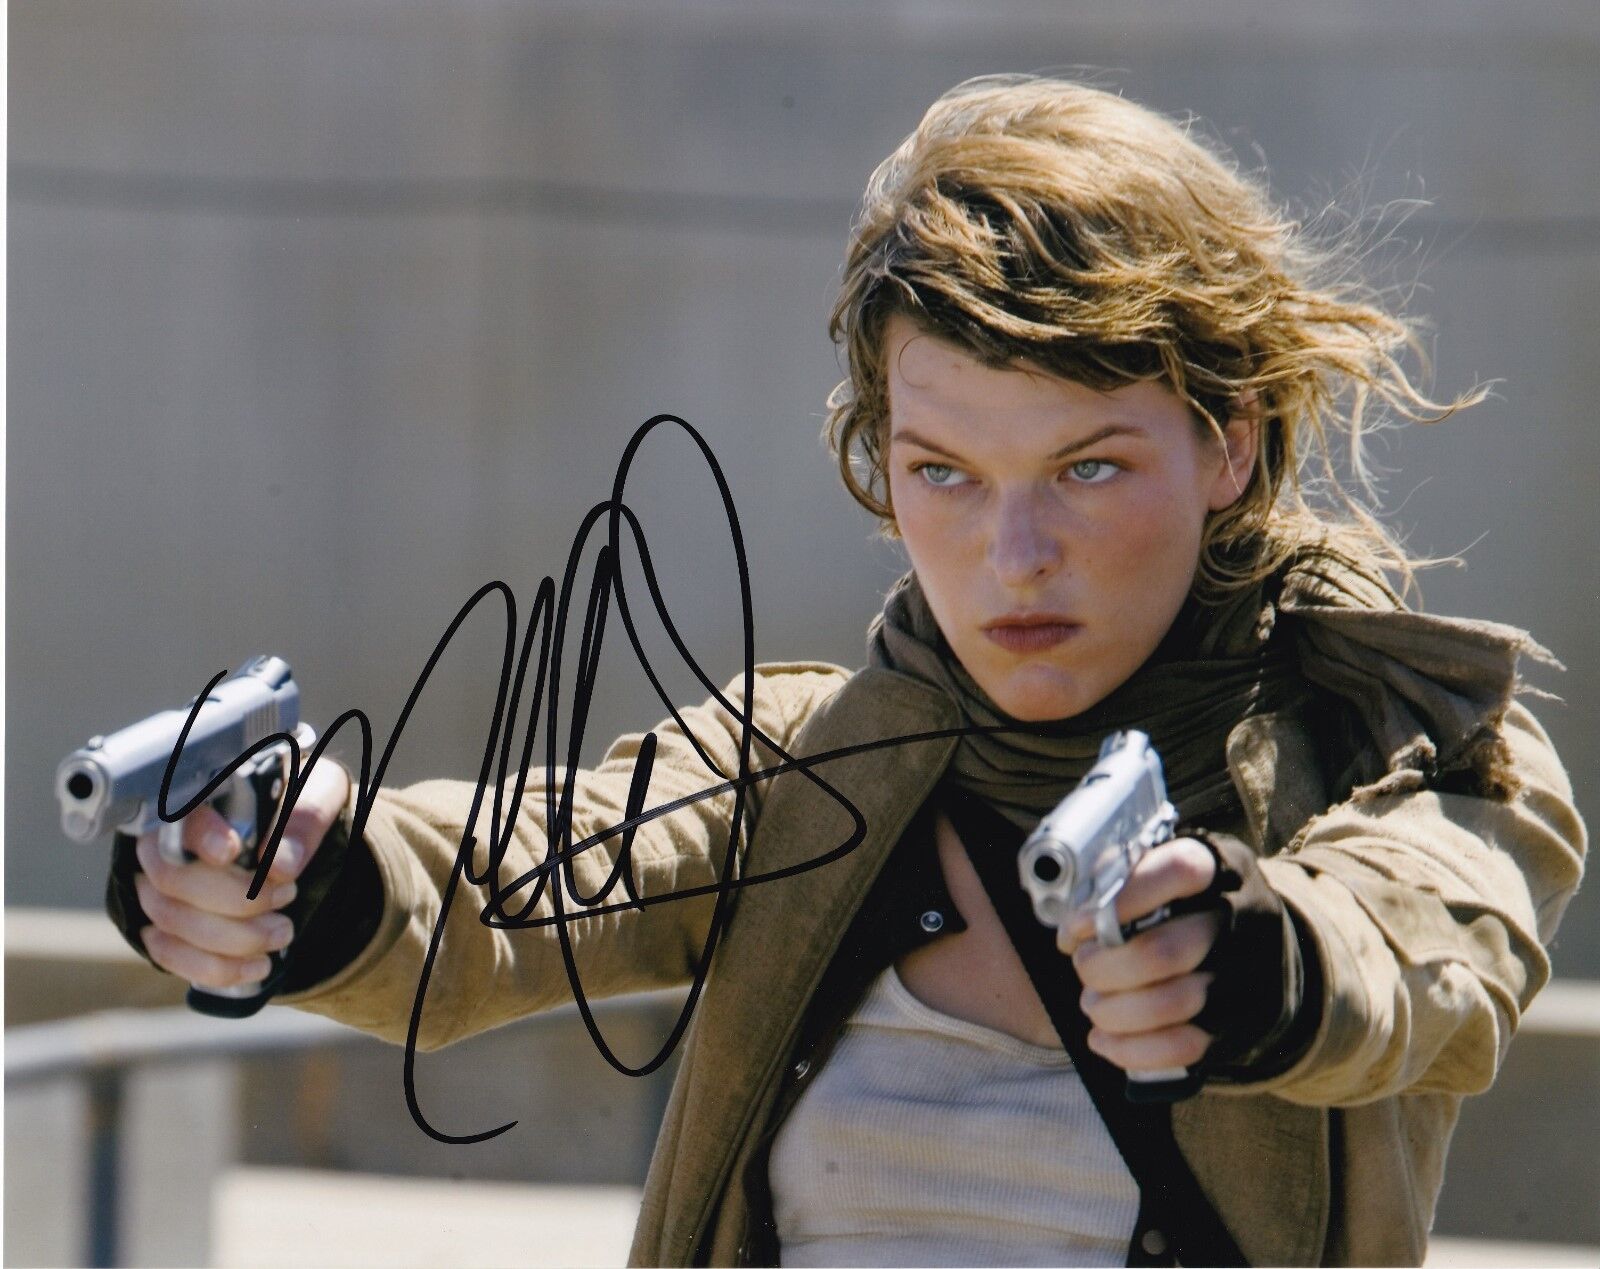 Milla Jovovich ‘Resident Evil’ Autographed 8x10 Photo Poster painting with CoA & Signing Details